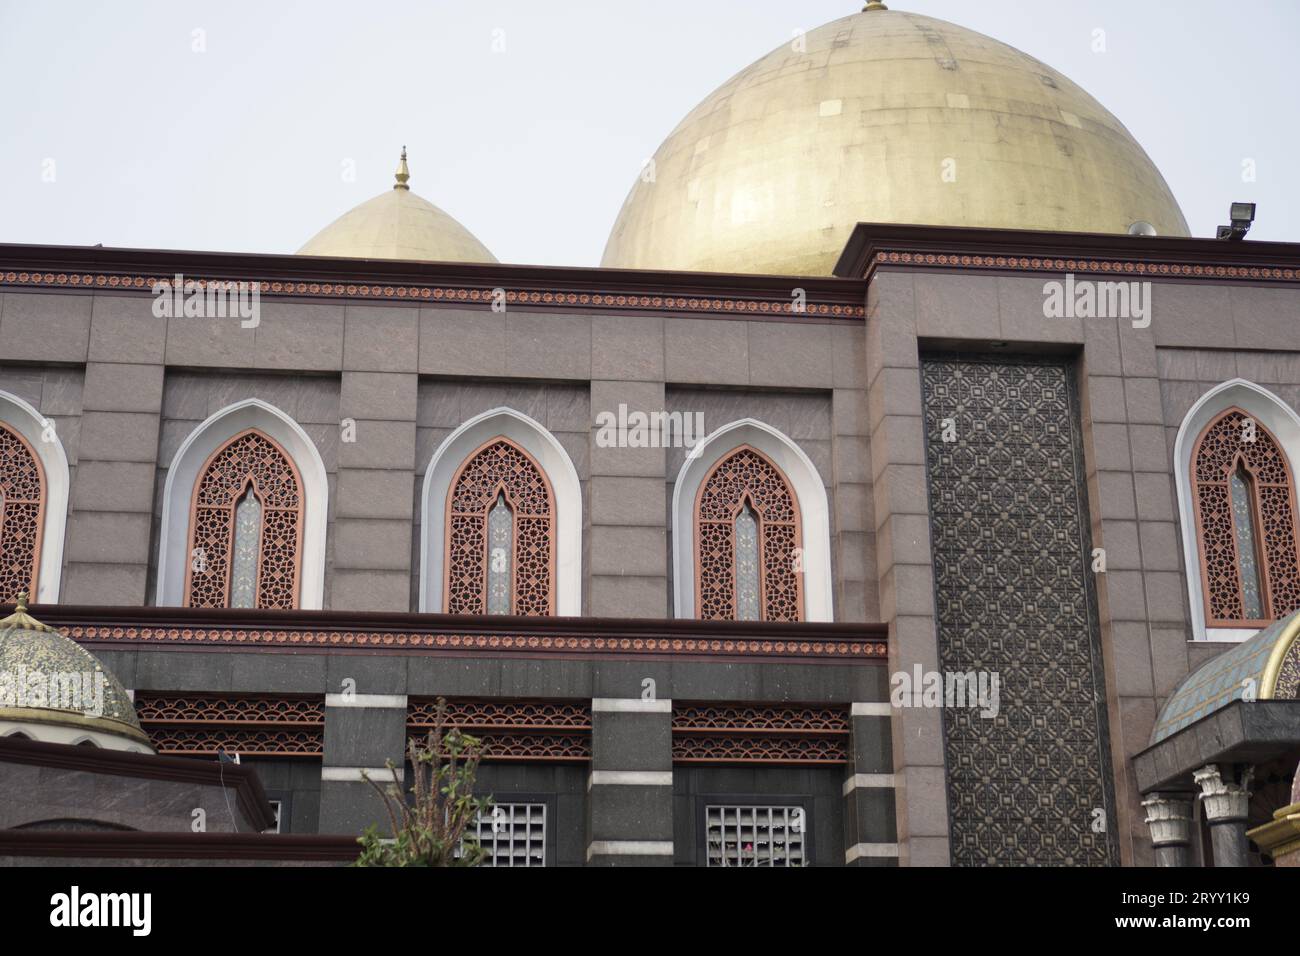 The mosque building with a golden yellow dome appears under a clear sky. Stock Photo